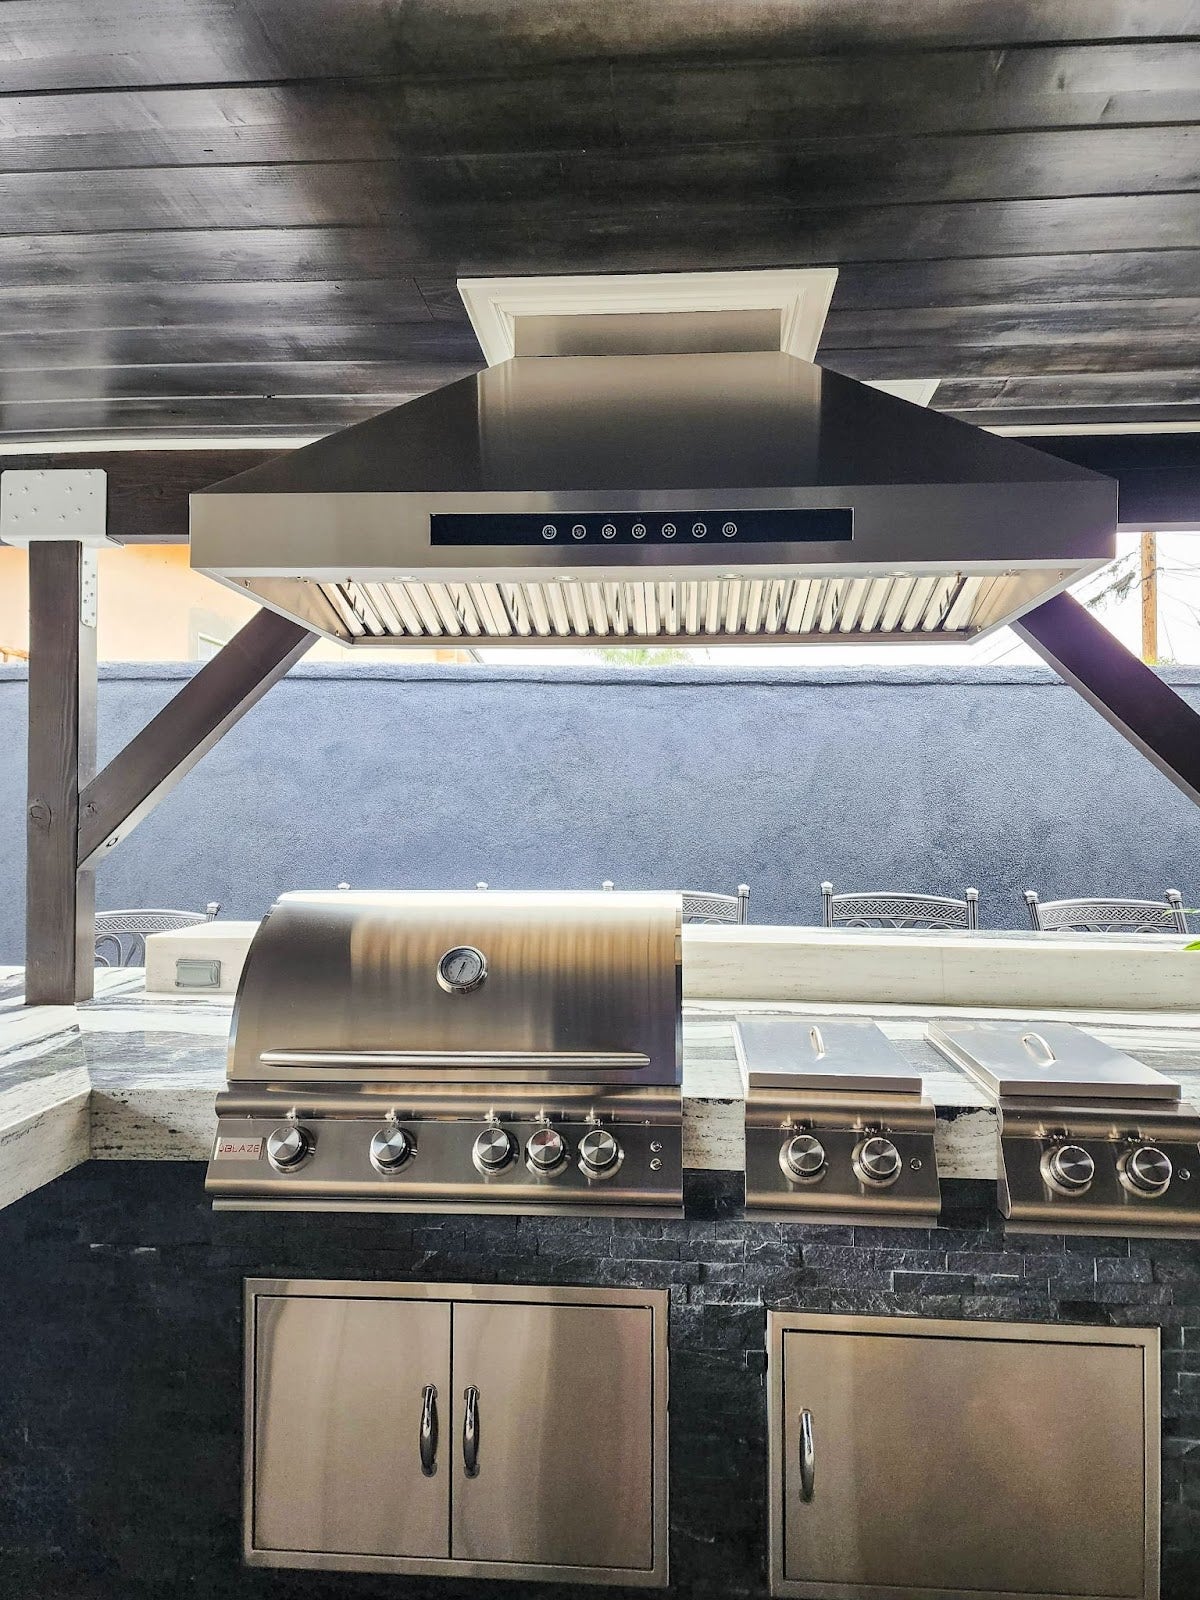 Contemporary outdoor kitchen with a stainless steel BBQ grill and extractor hood, set against a dark stone wall under a stained wooden ceiling. - Proline Range Hoods - prolinerangehoods.com 